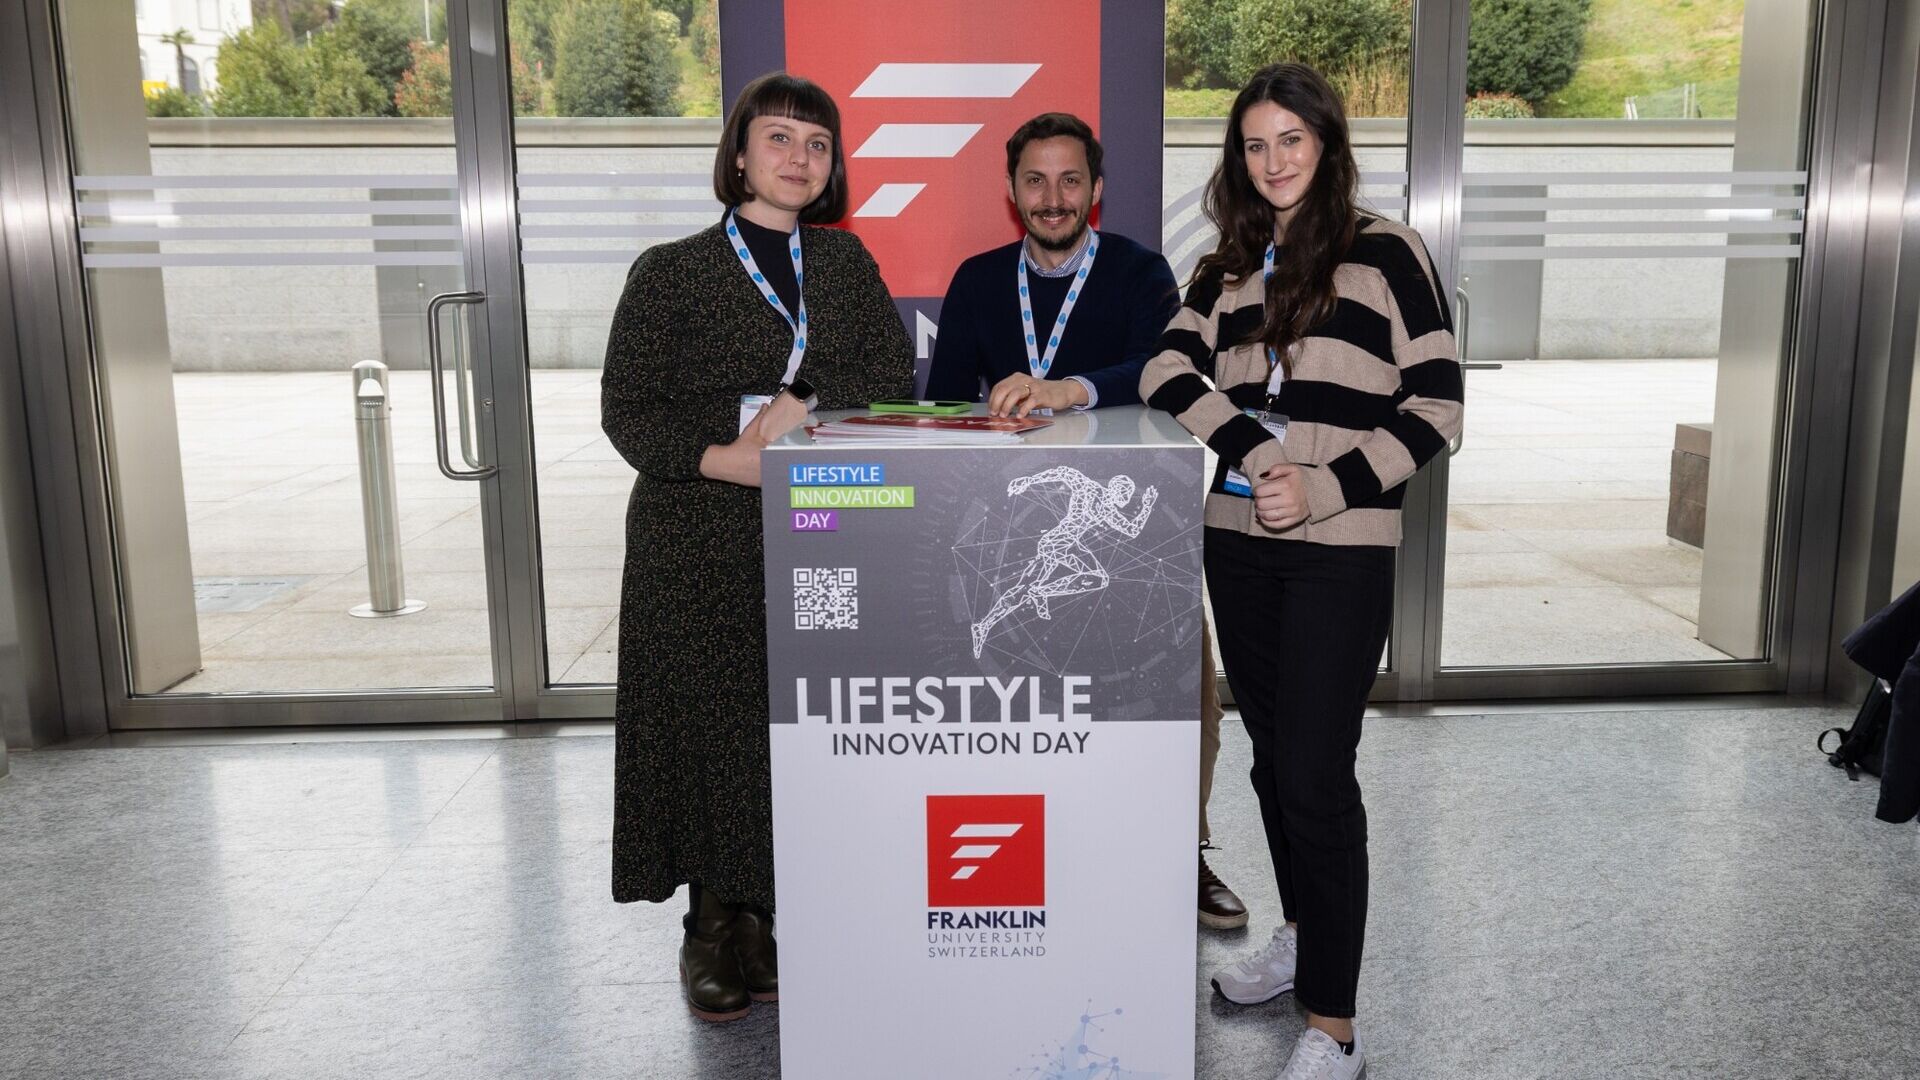 Lifestyle Innovation Day: the stands at the LAC in Lugano on 13 March 2023